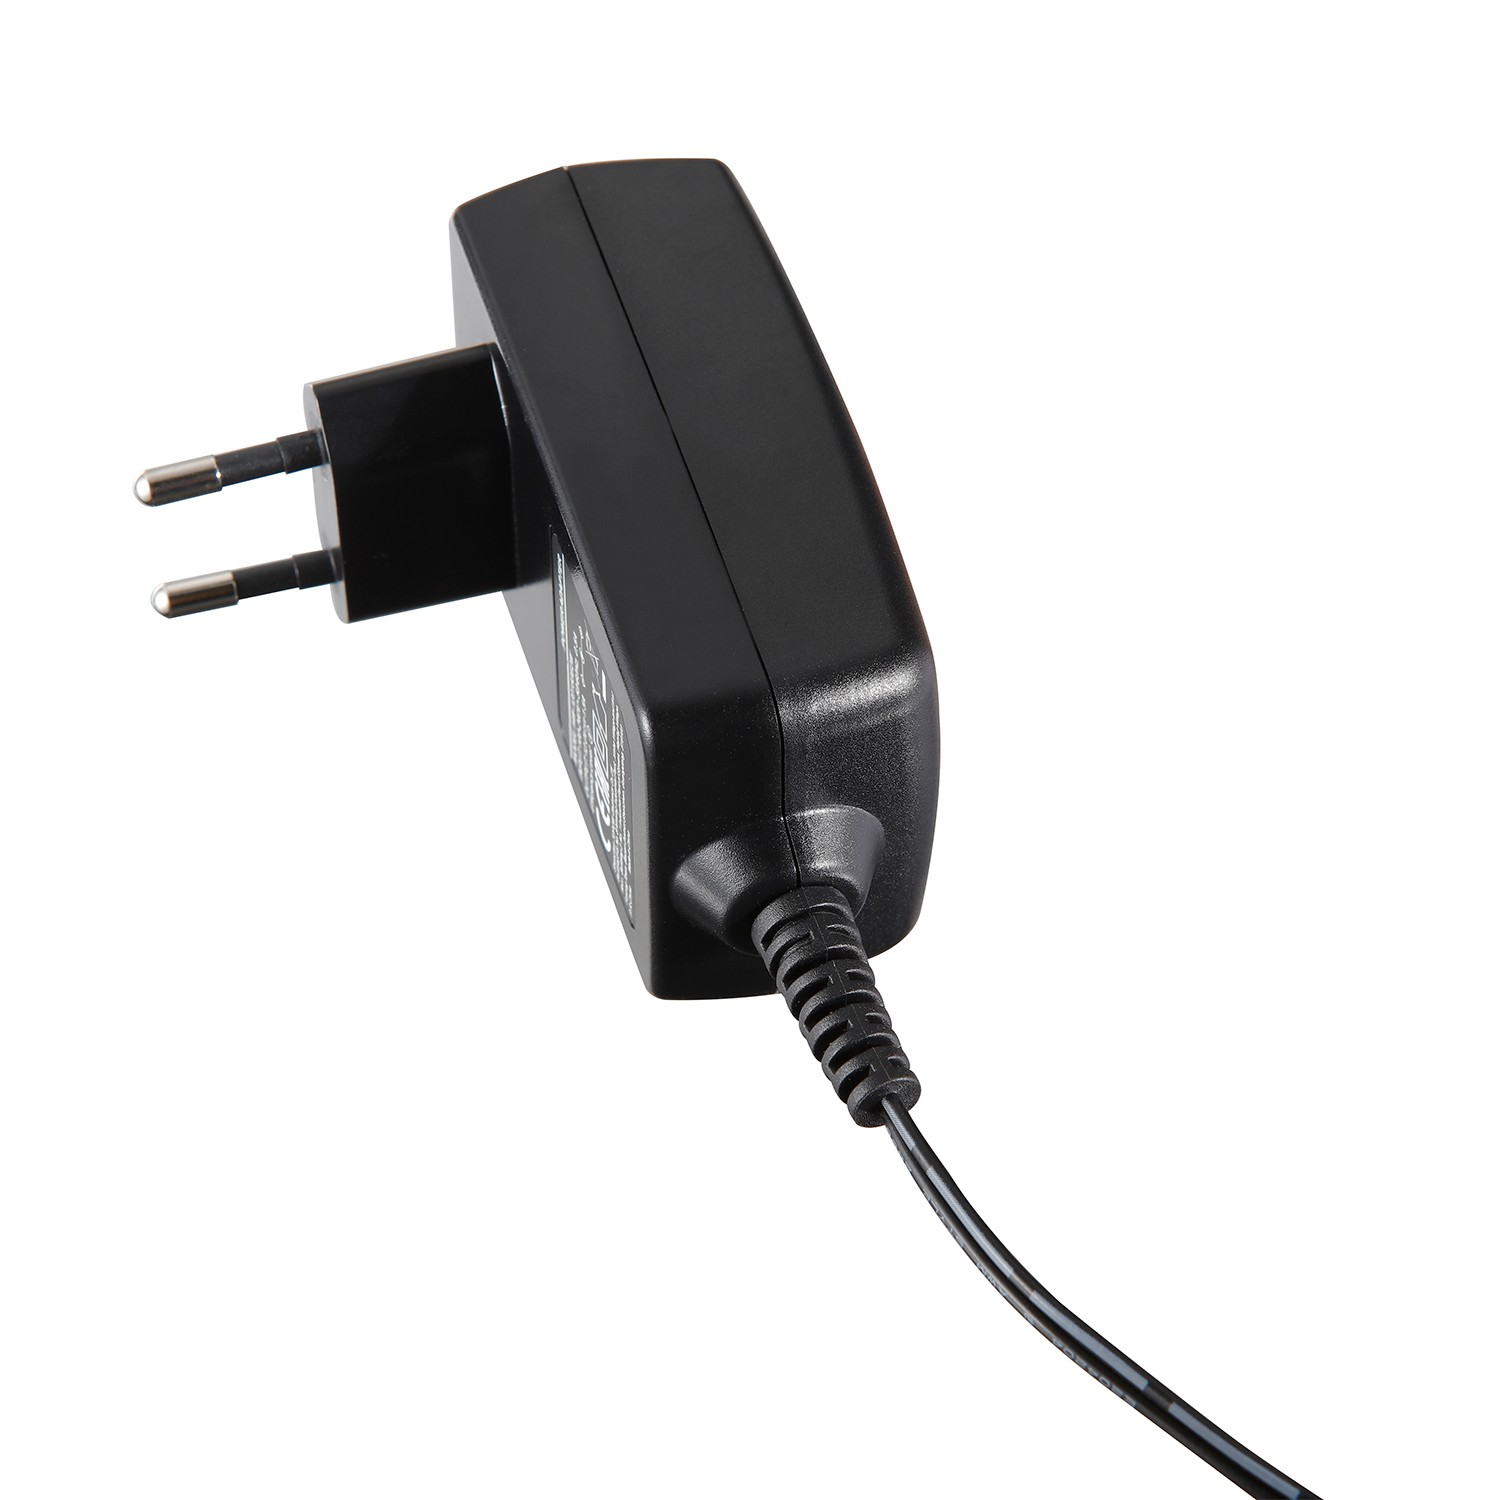 When the power adapter is in normal use, what is the normal temperature?(图1)